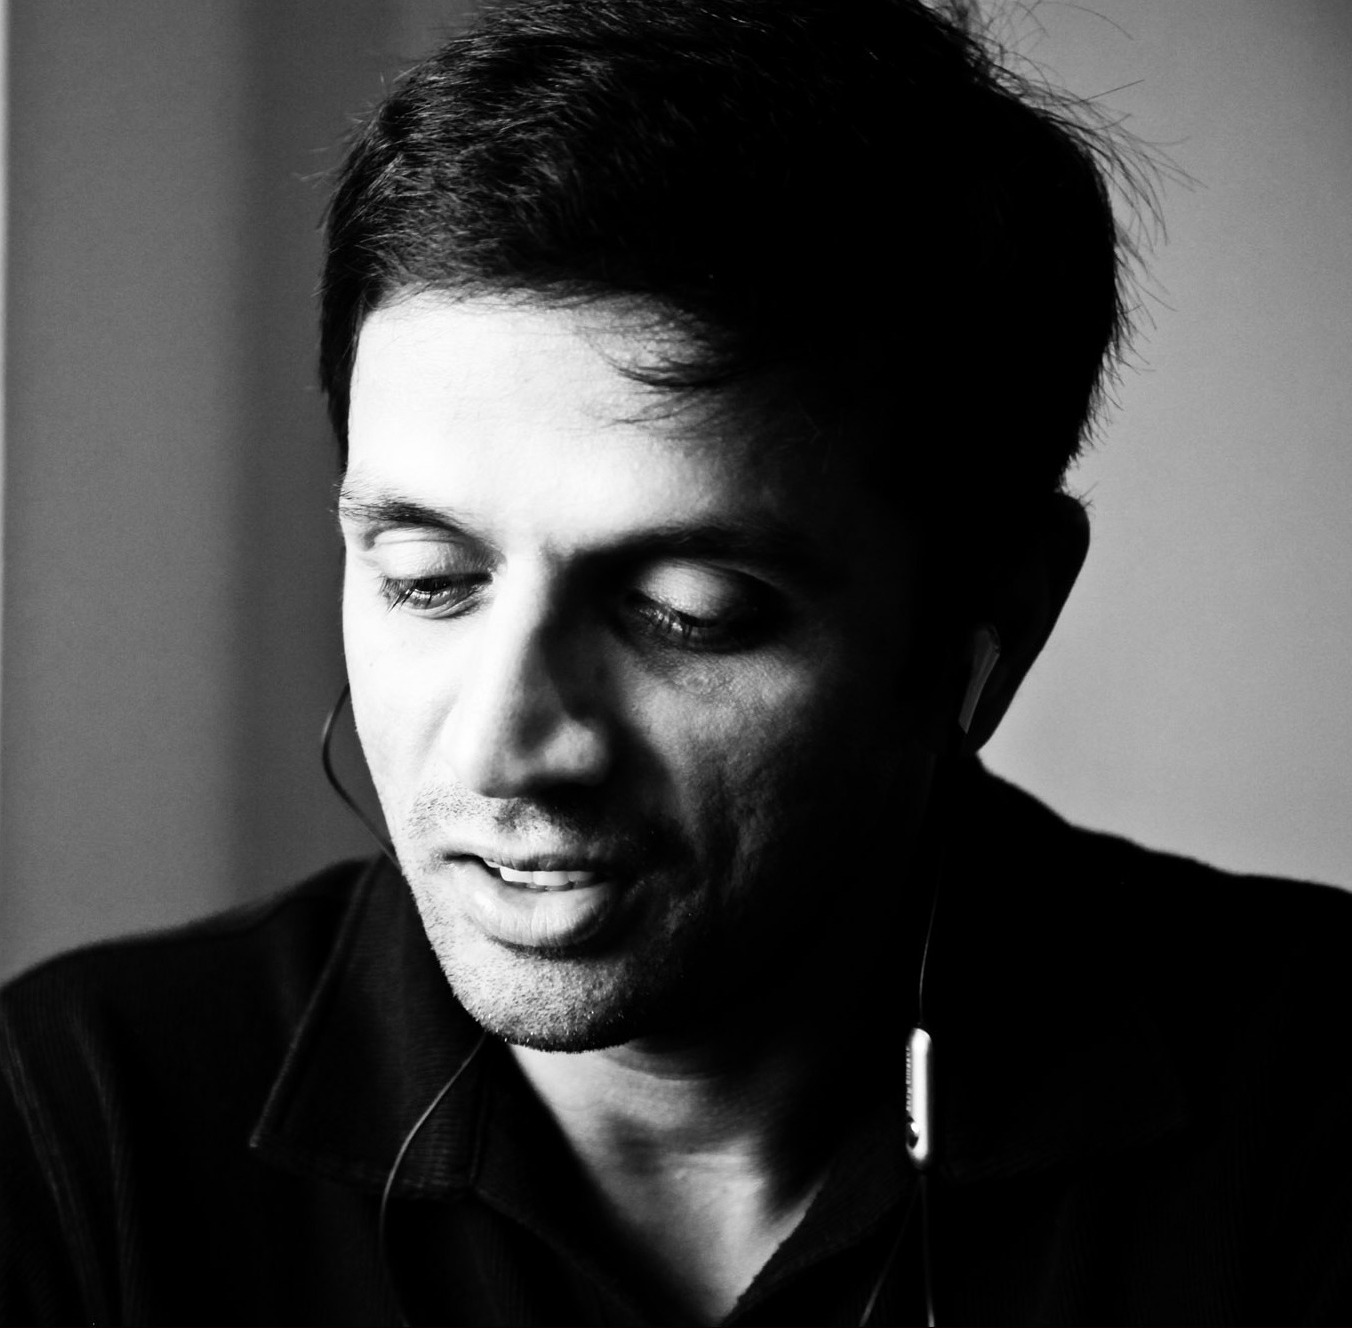 Rahul Dravid was the first contender for Team India’s head coach but he turned down the offer, reveals Vinod Rai